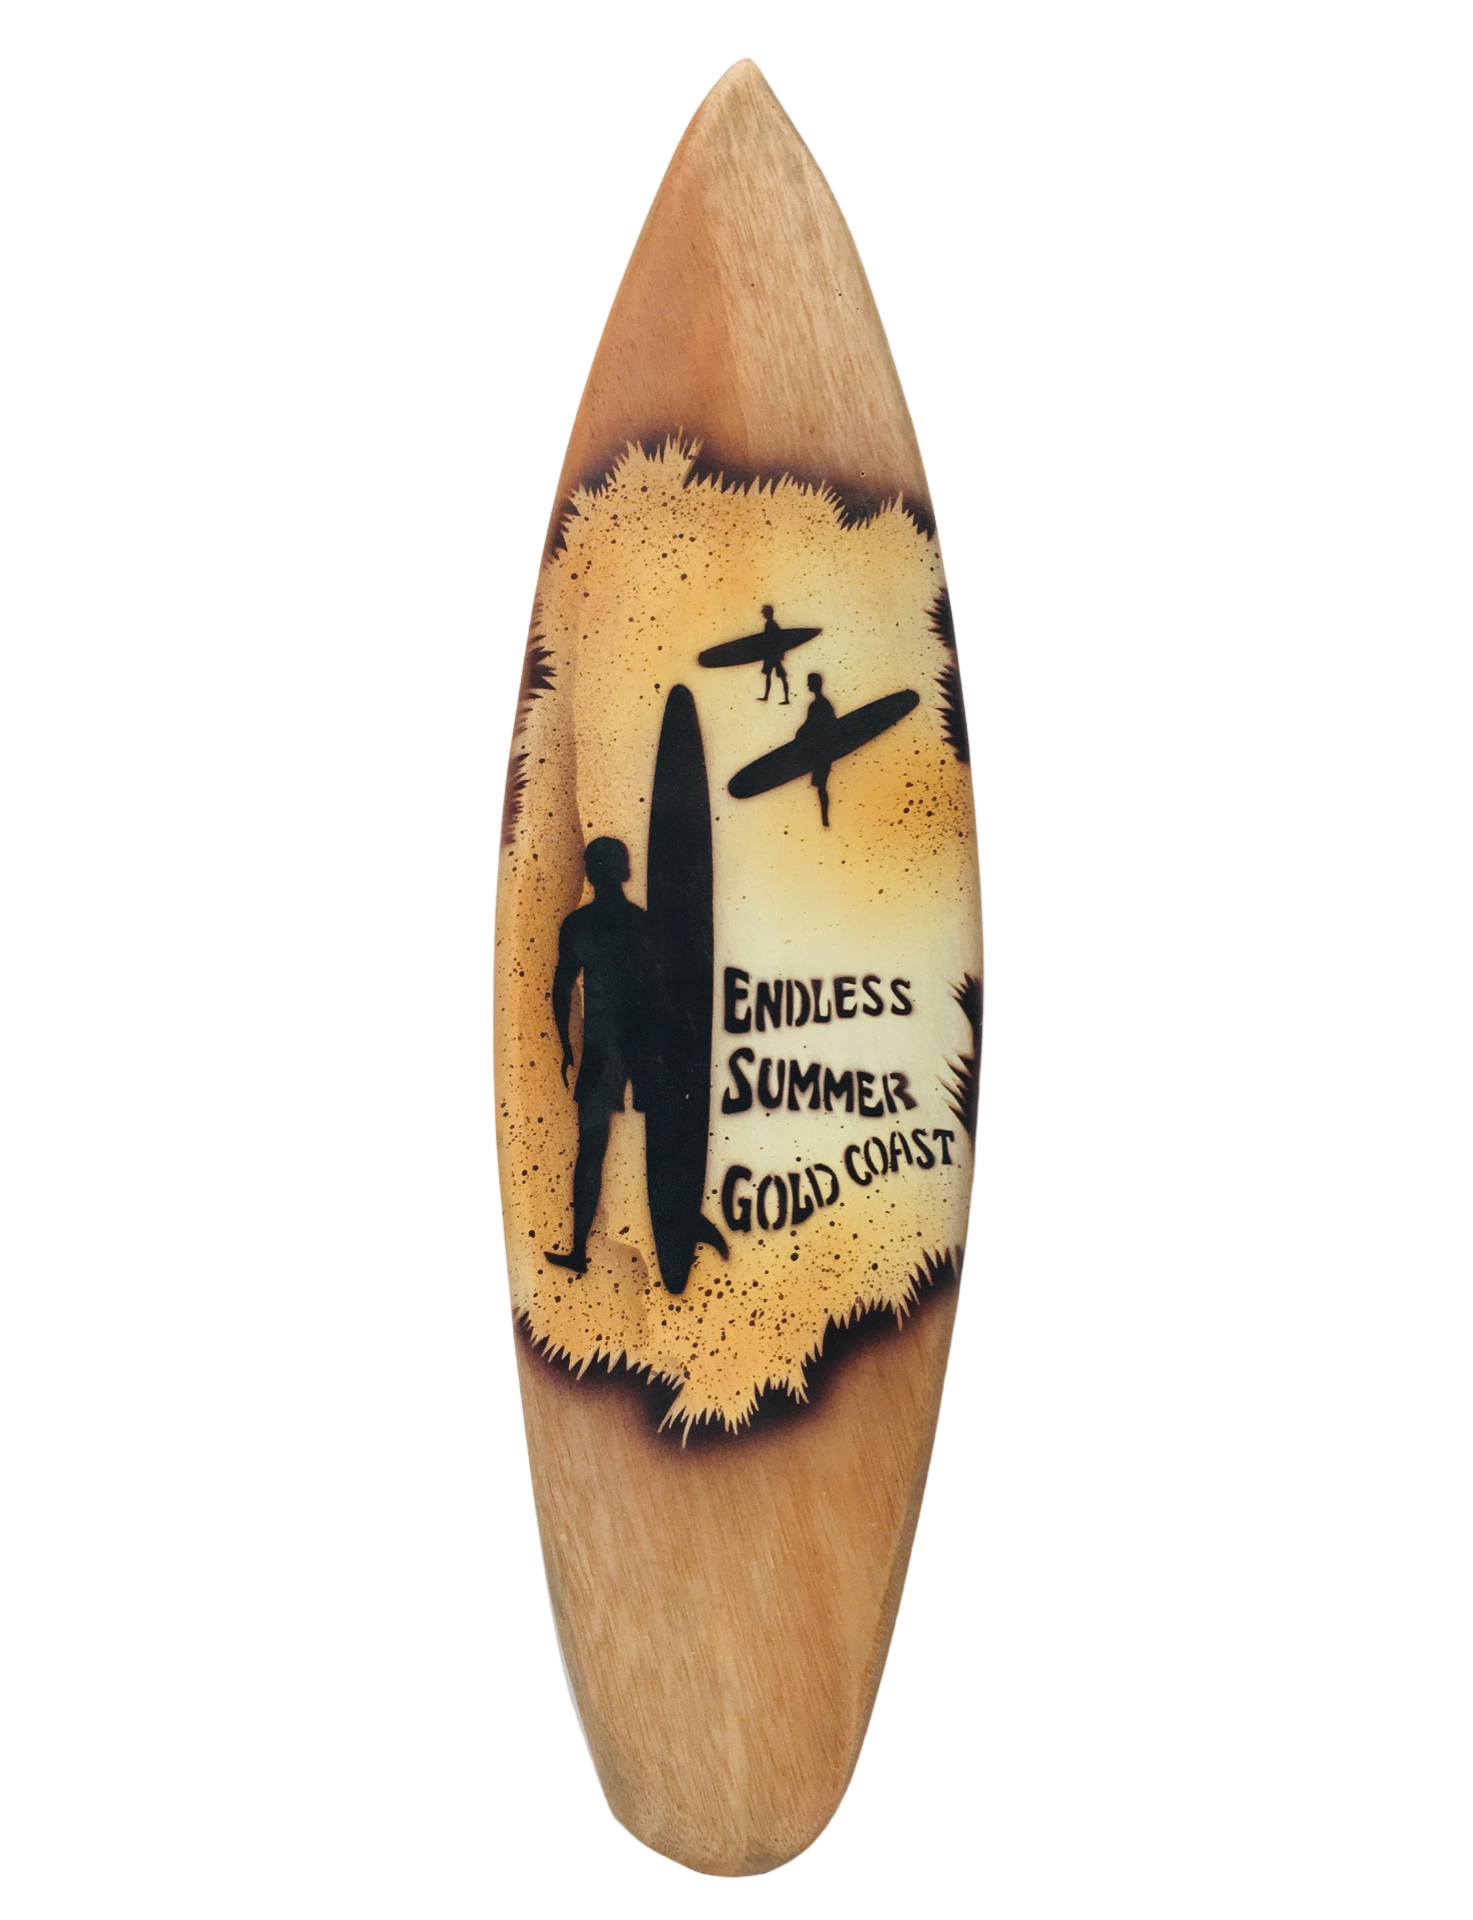 A light brown surfboard shaped piece of wood with 'Endless Summer, Gold Coast' writing. And three men carrying surboards. 